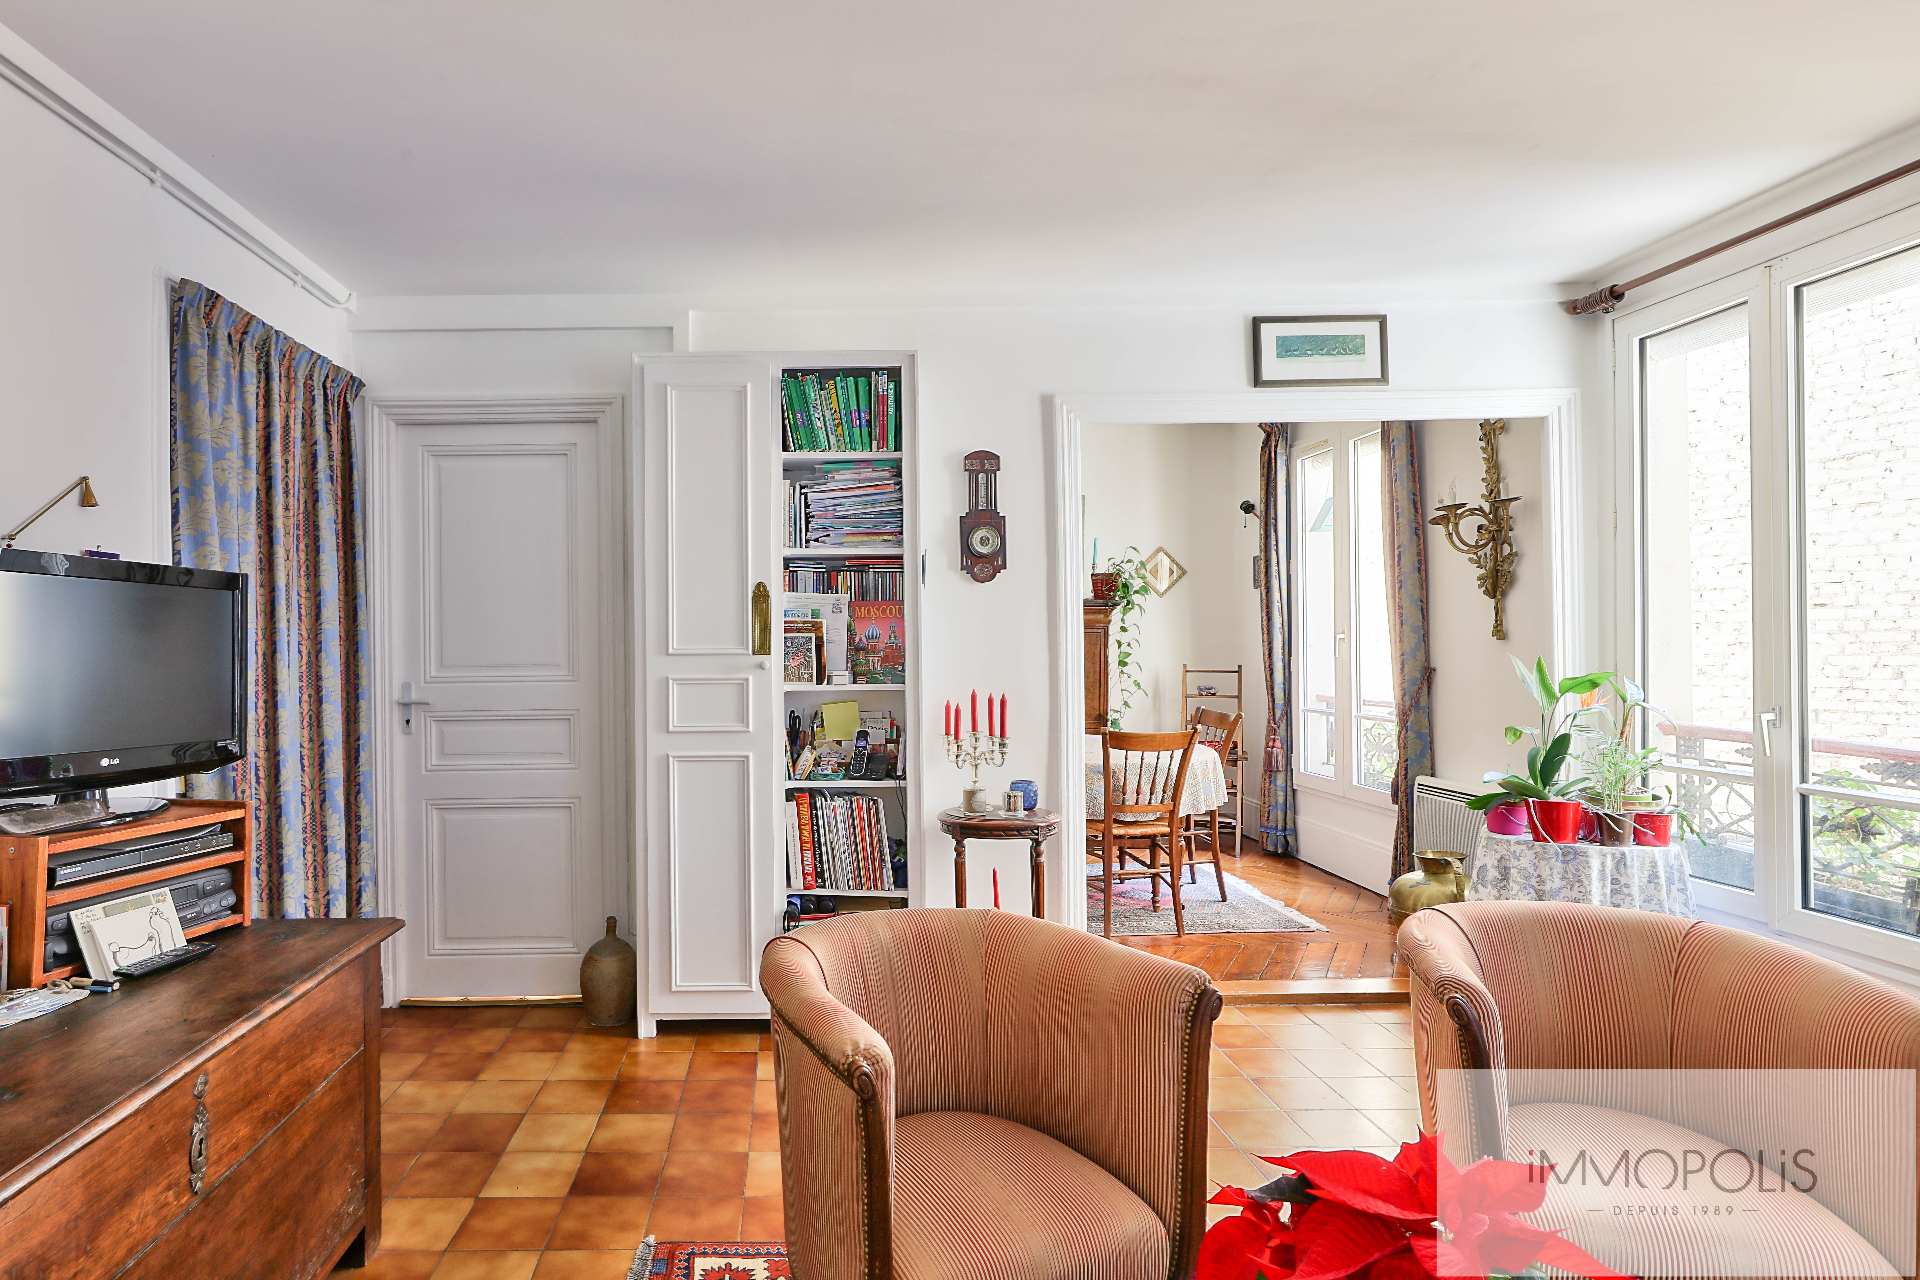 Beautiful 4 rooms in Montmartre, in 3rd floor with elevator in a beautiful stone building 1